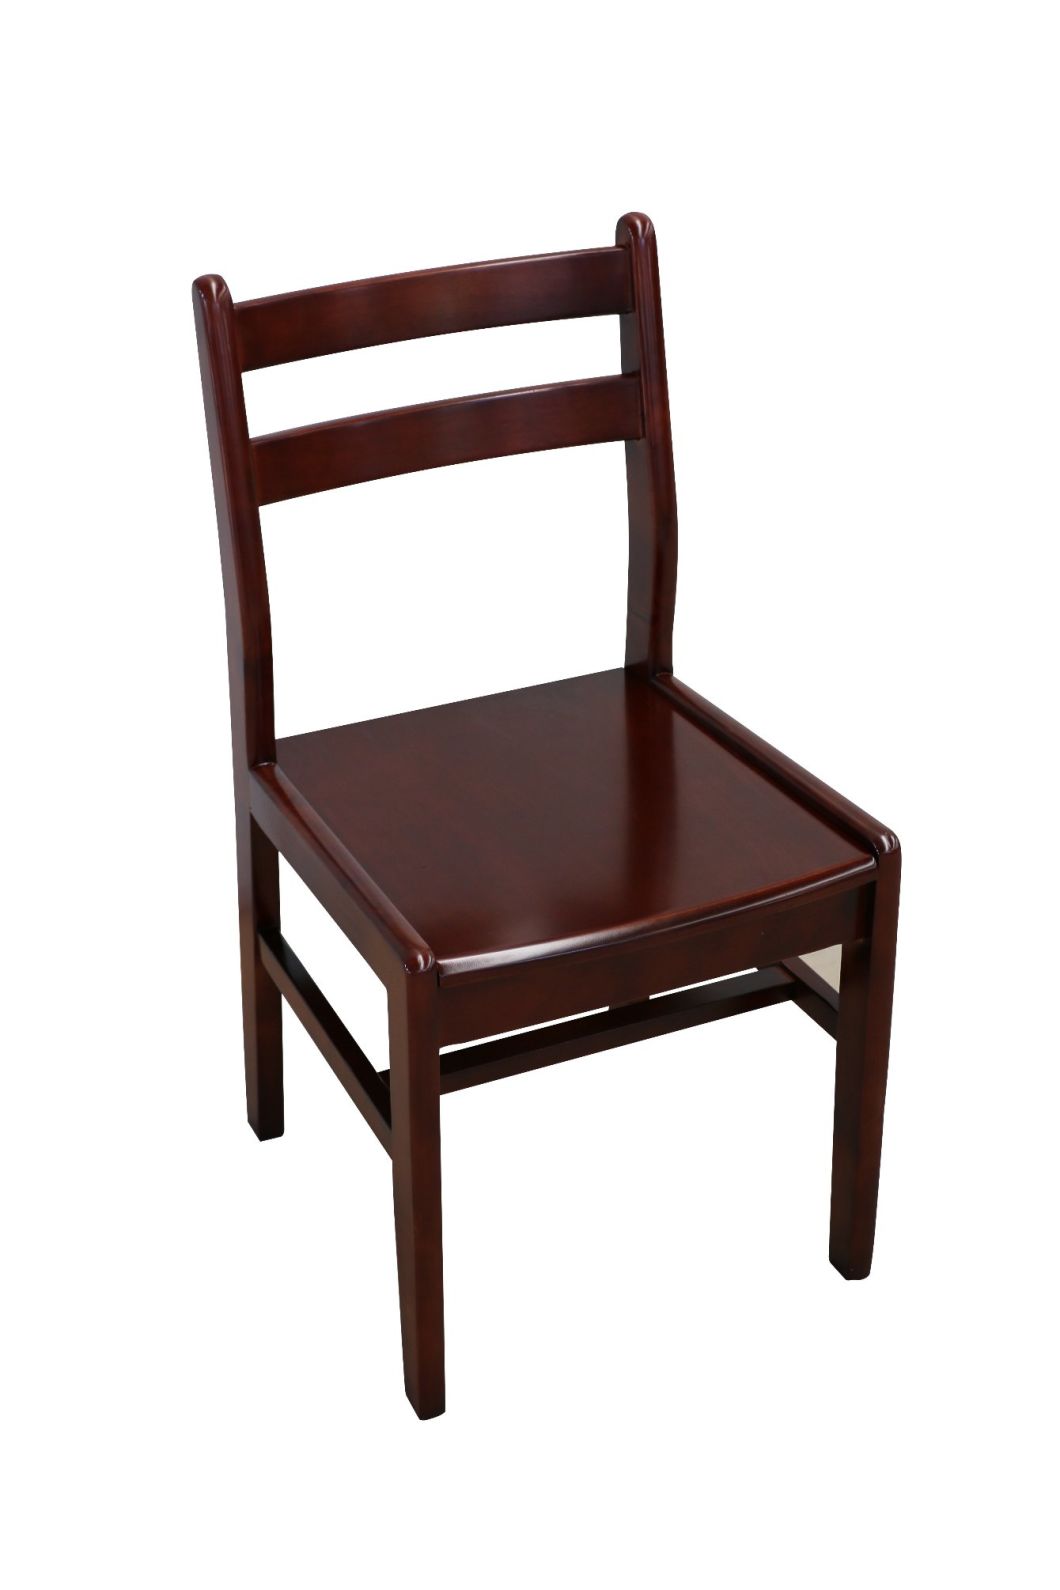 General Ues Home Furniture Table Chair for Dining Room